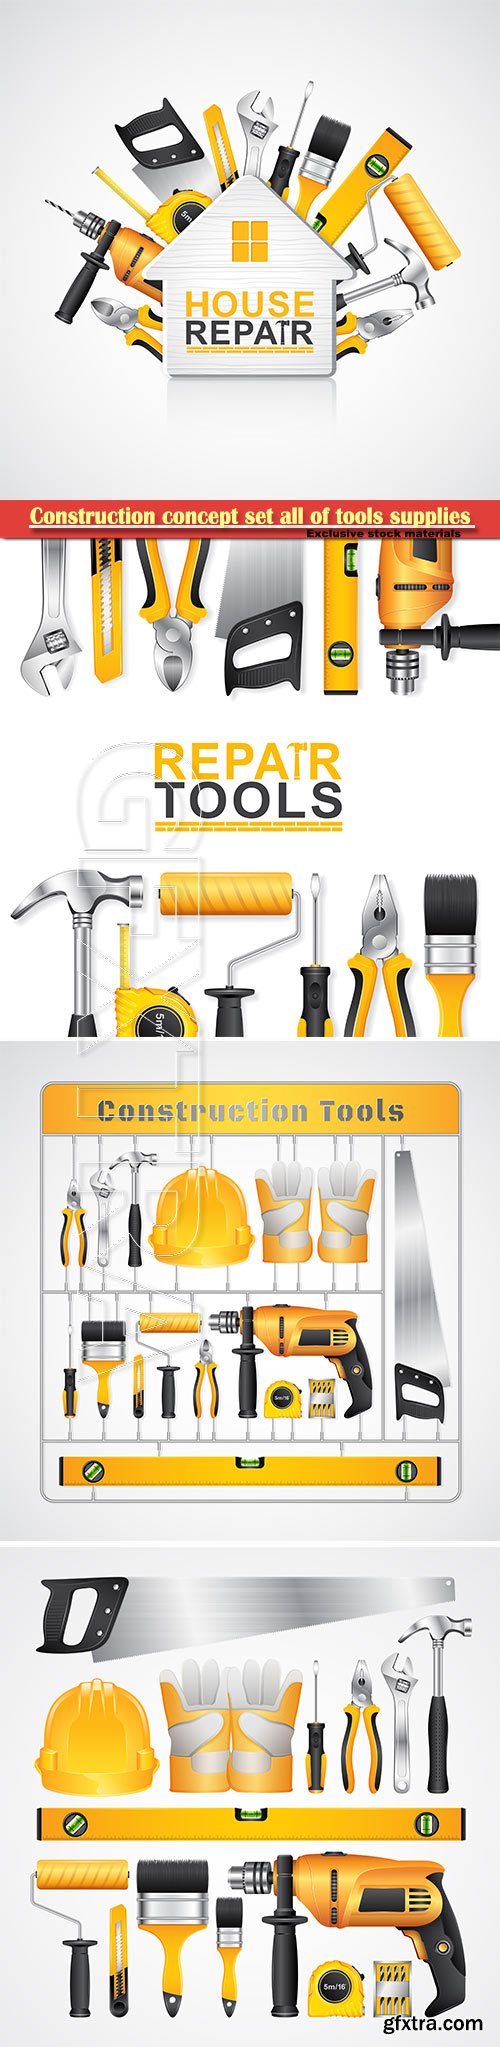 Construction concept set all of tools supplies for house repair builder vector illustration